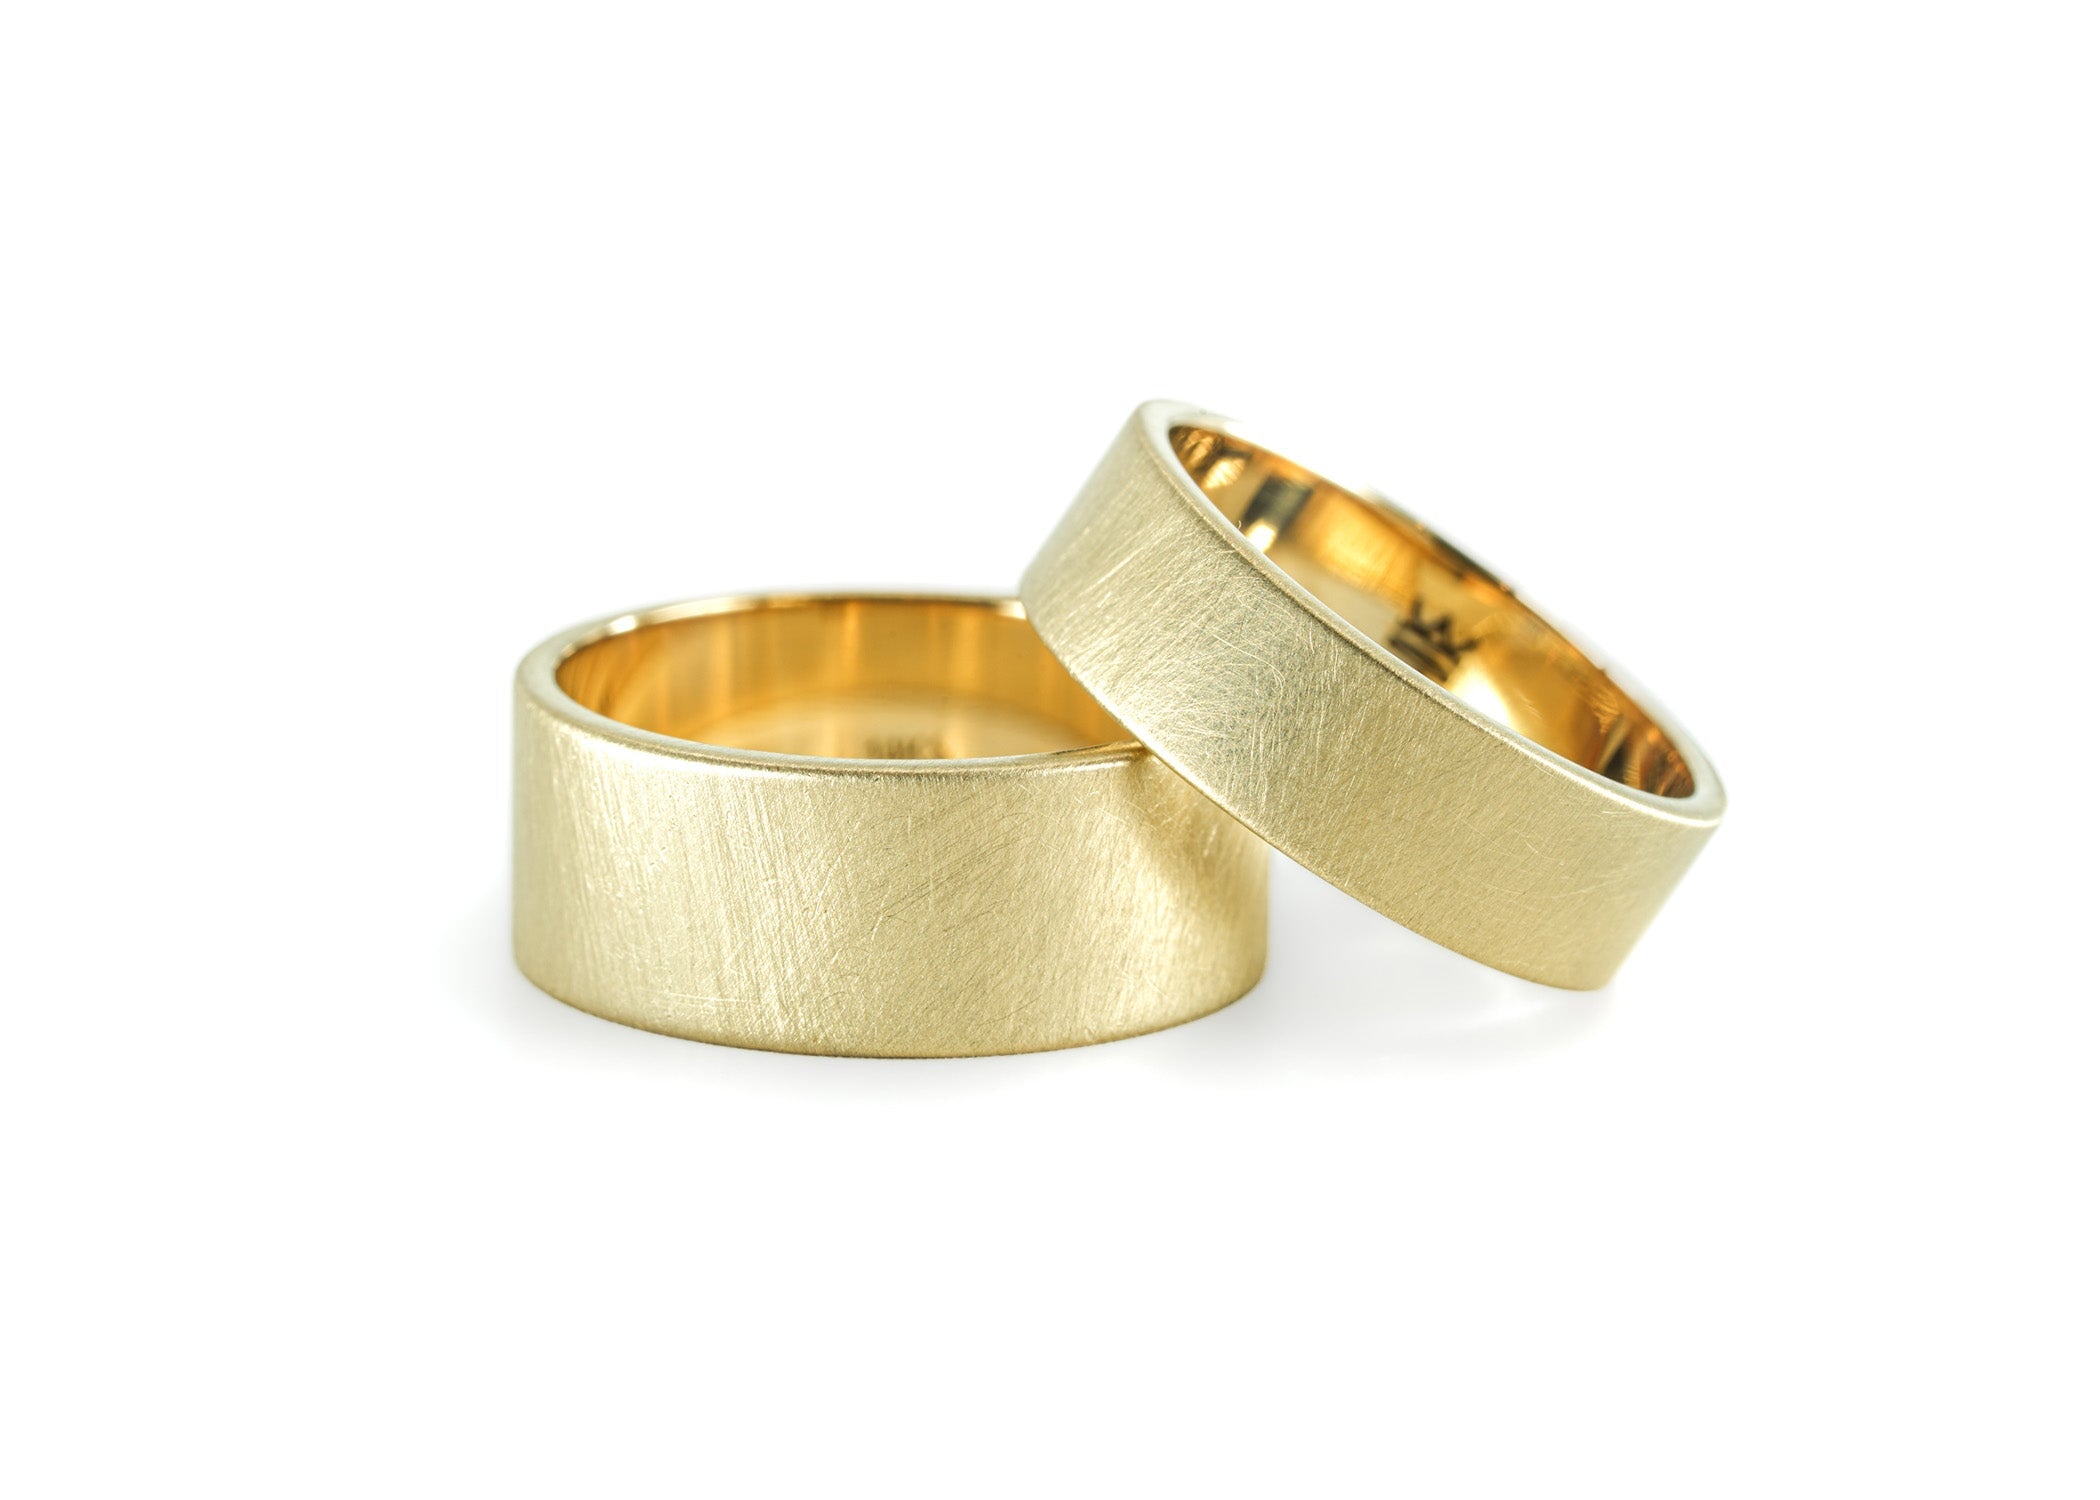 His Hers Couples Rings Set 14K Gold Plated Small Round CZ Wedding Ring set  Mens Matching Band - Size W5M7|Amazon.com